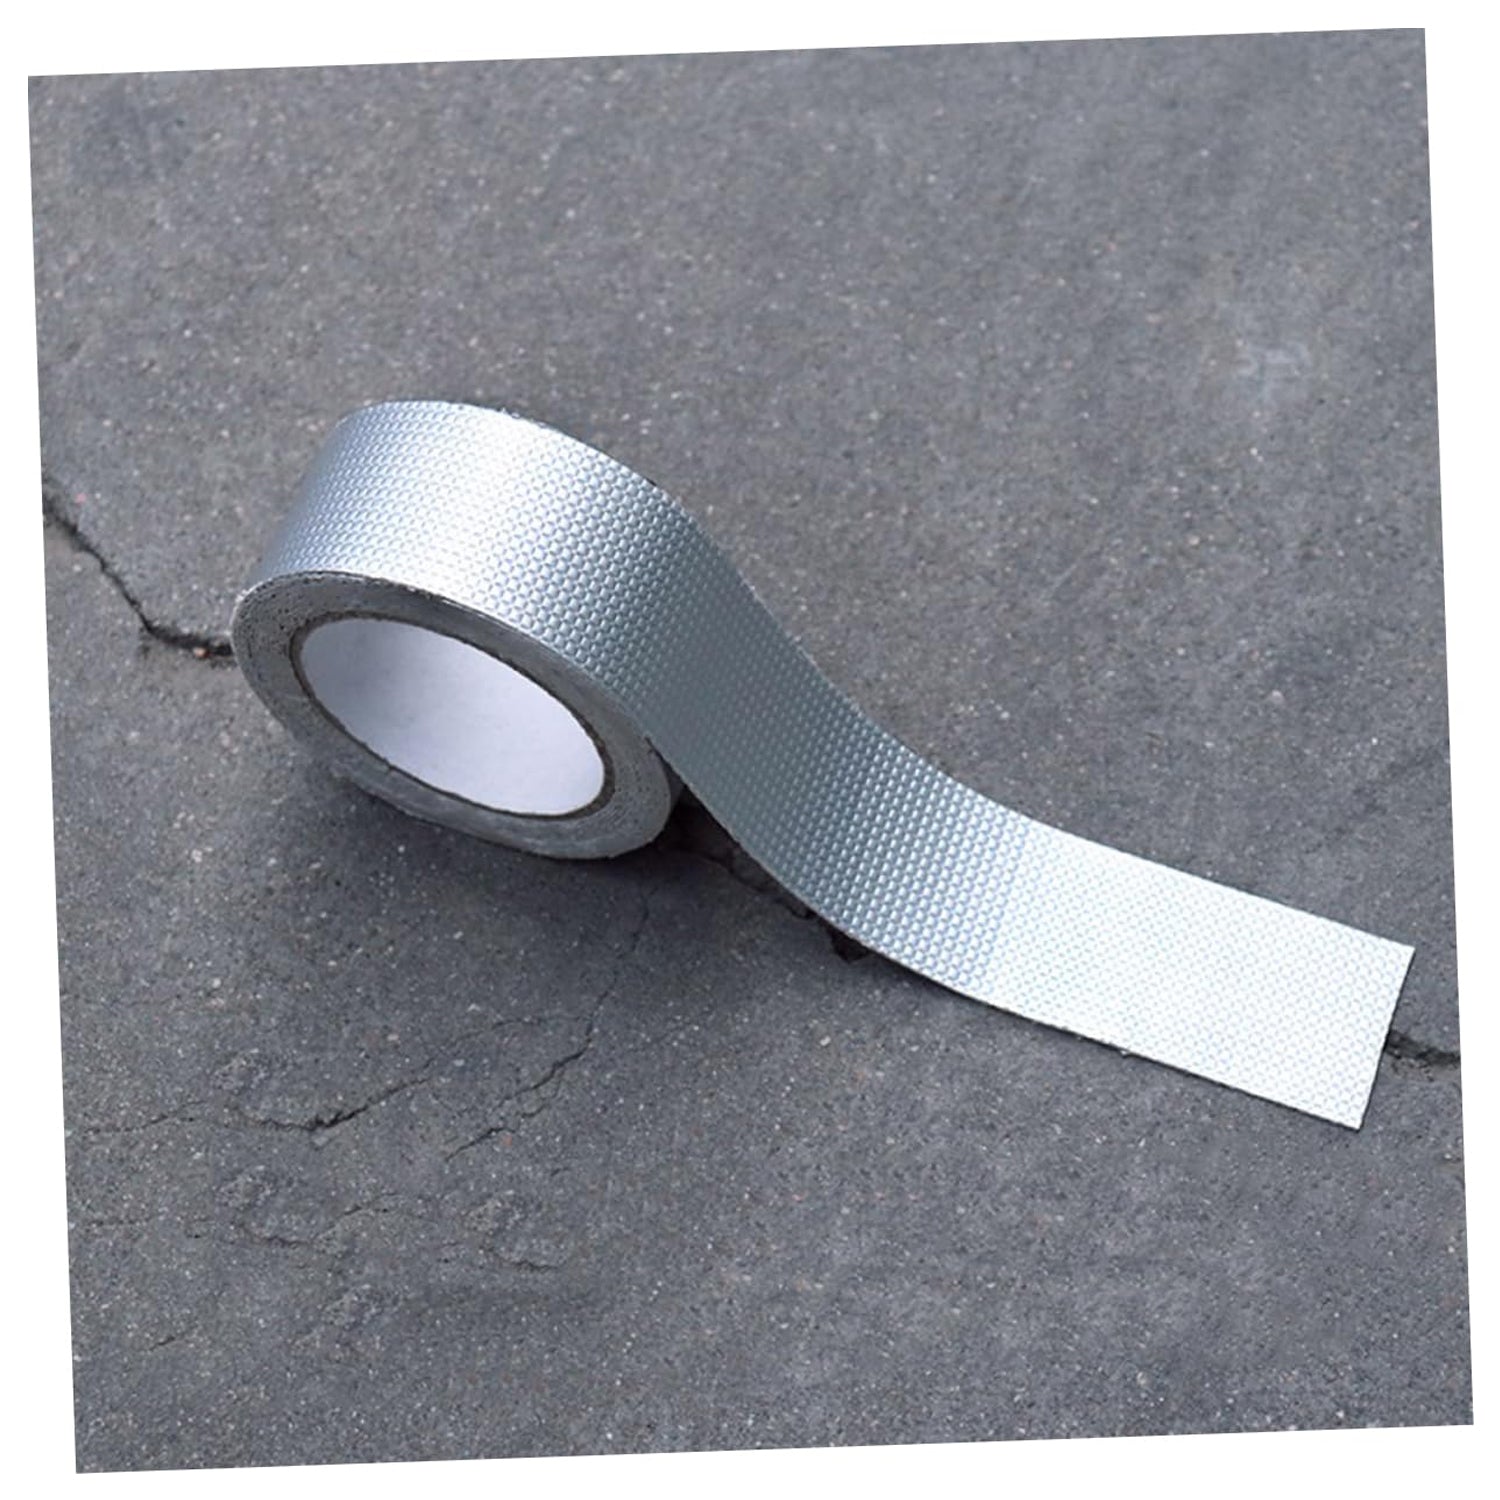 7480 Self-Adhesive Insulation Resistant High Temperature Heat Reflective Aluminium Foil Duct Tape Roll (1 Pc 796 Gm)